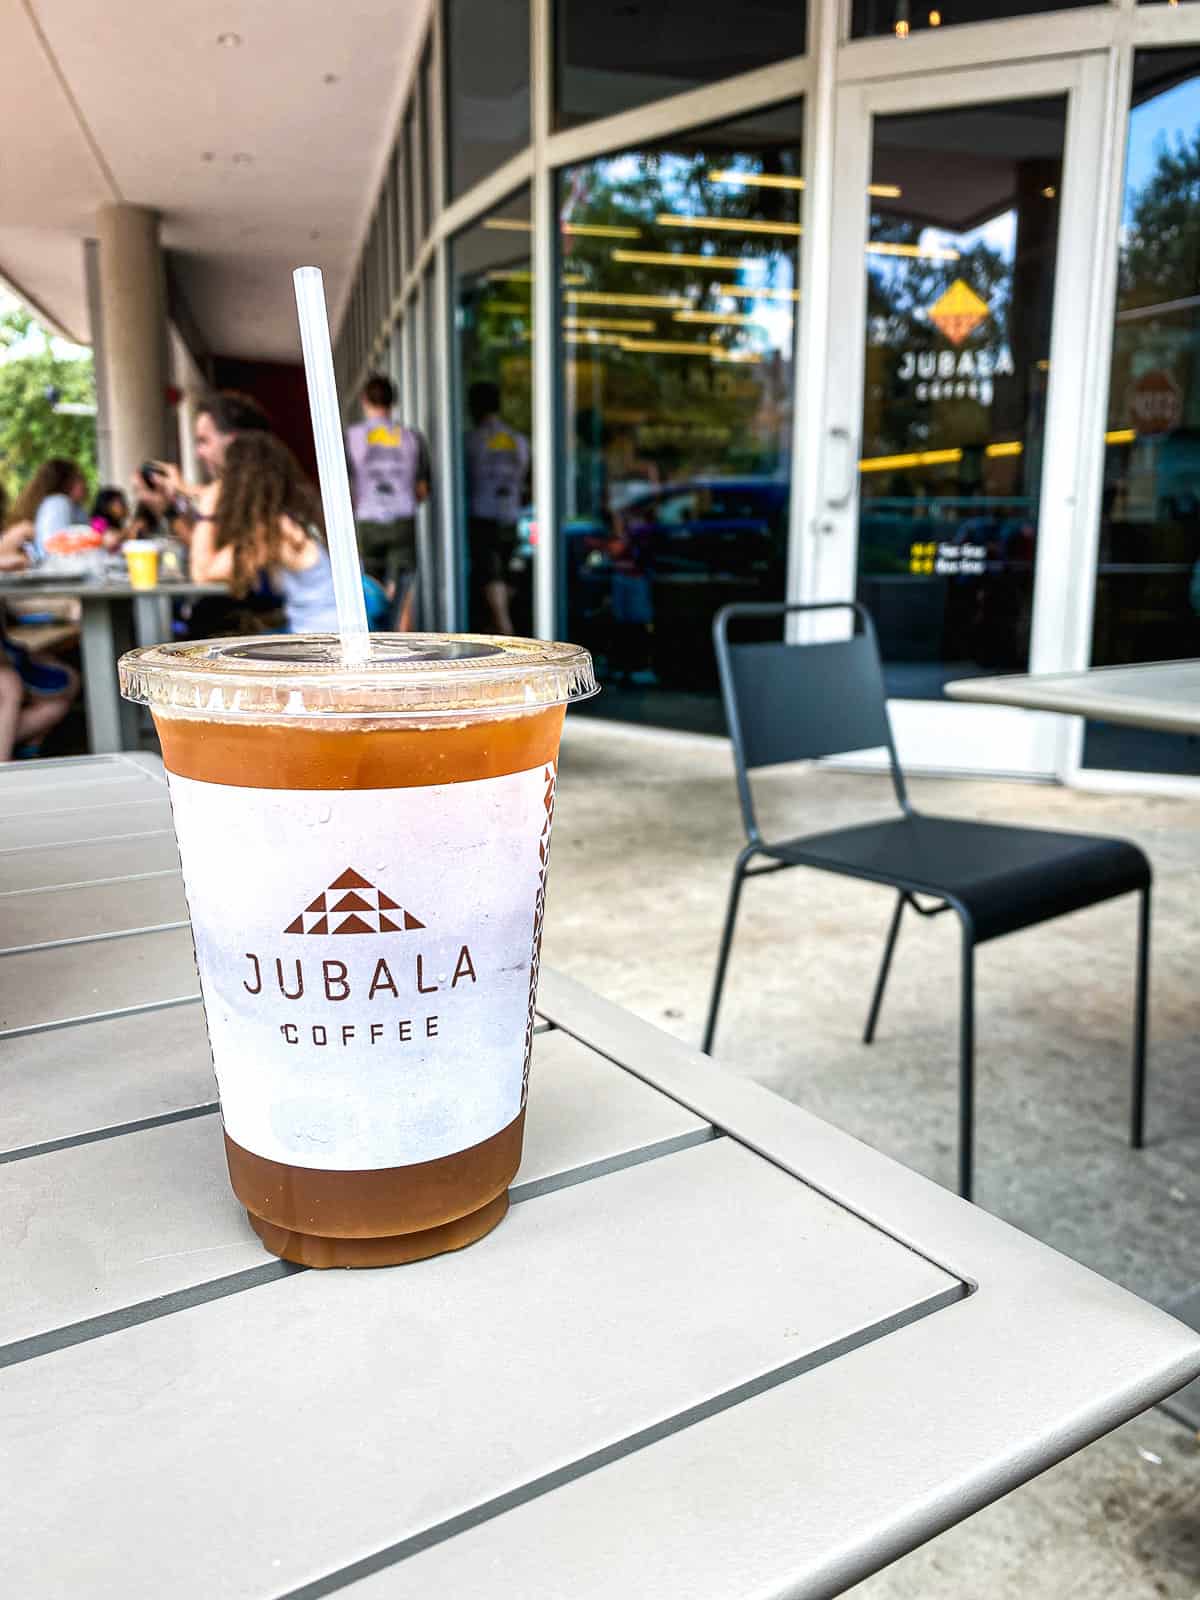 An iced coffee in a plastic cup that says Jubala on it on a table outside with large windows